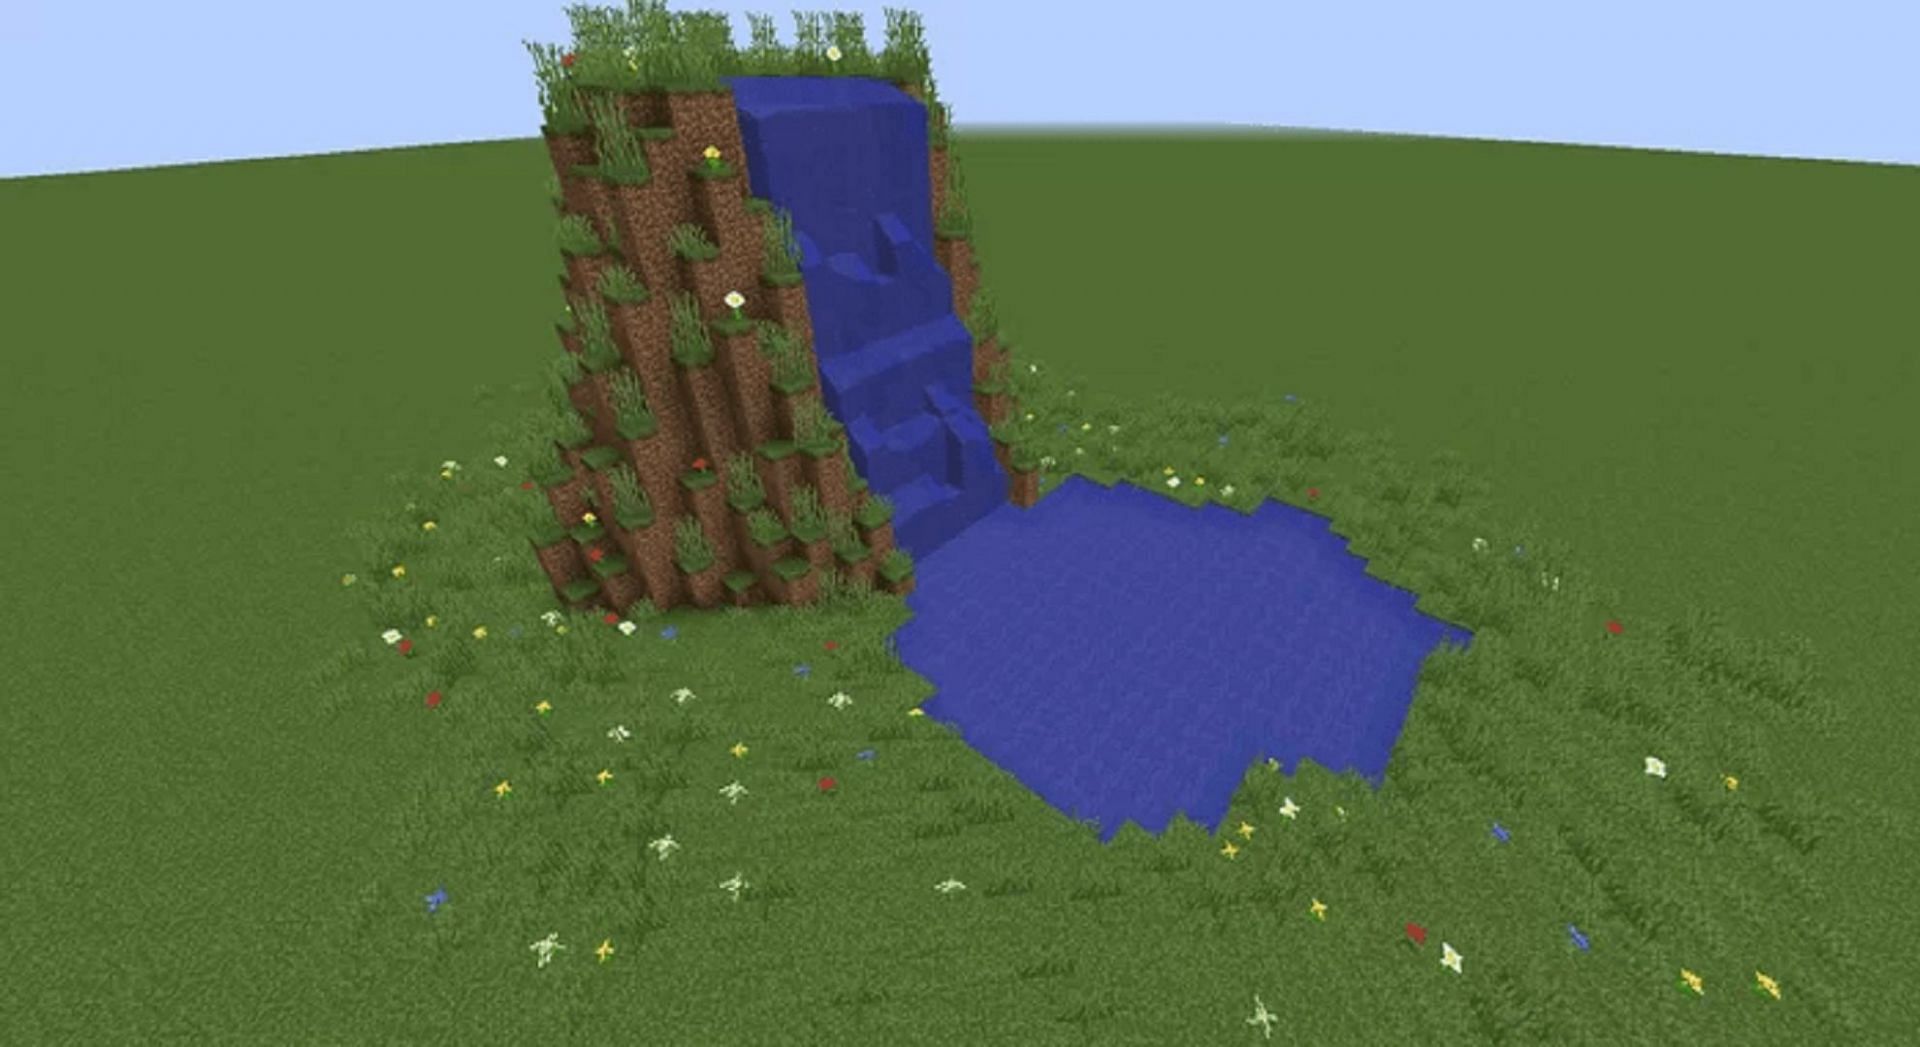 A basic waterfall design in Minecraft (Image via Part_Egg/Planet Minecraft)